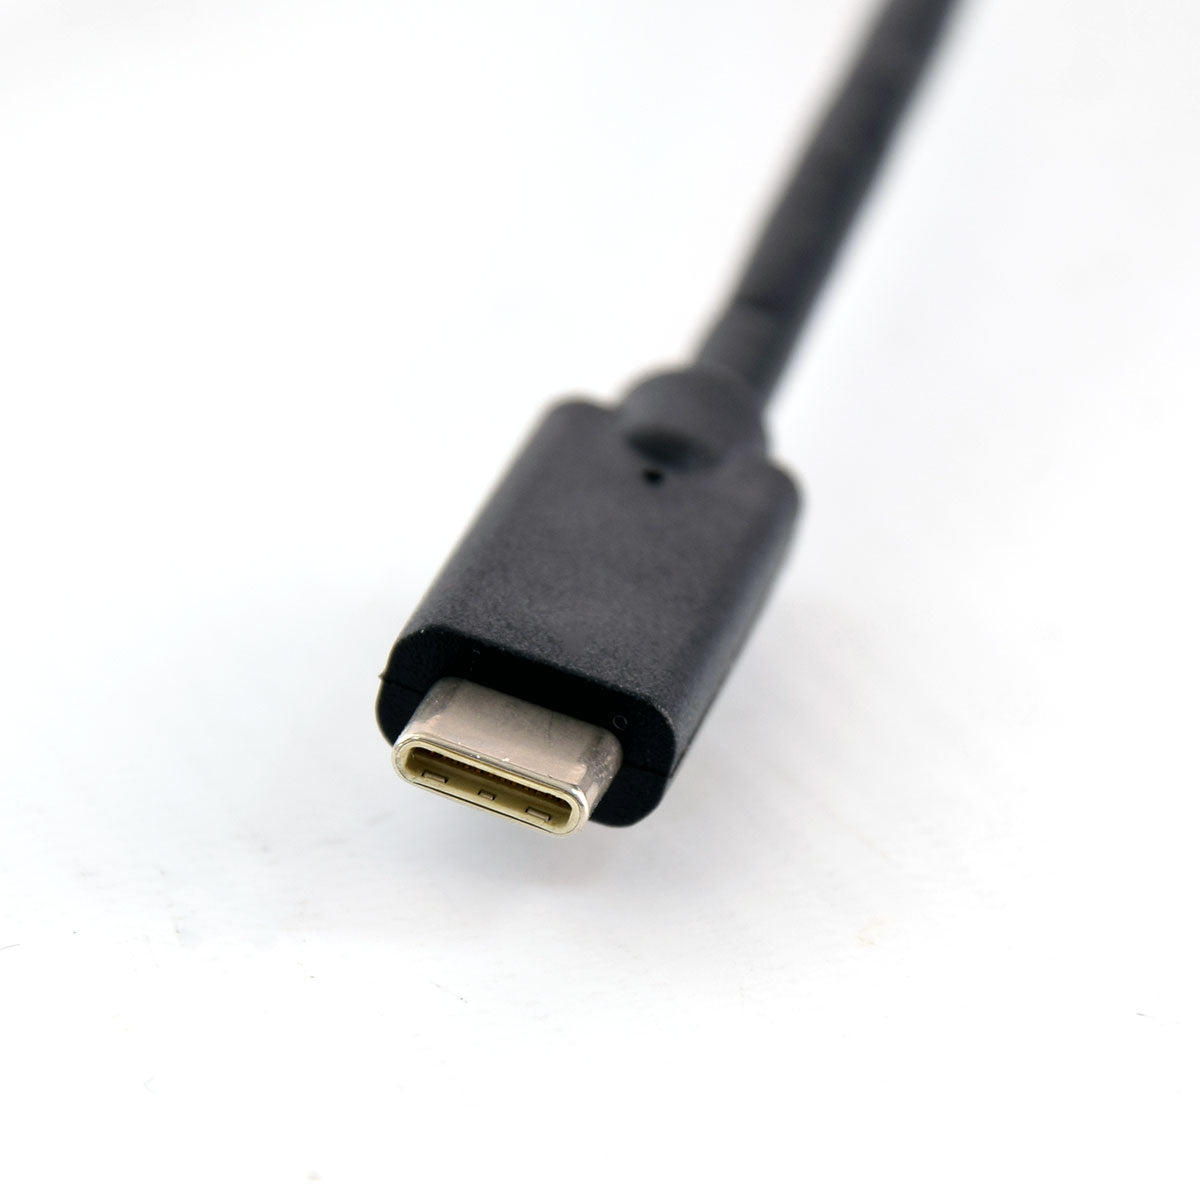 USB-C Cable - USB 3.0 Type C to Type A (1-6ft) Multipack - 3ft